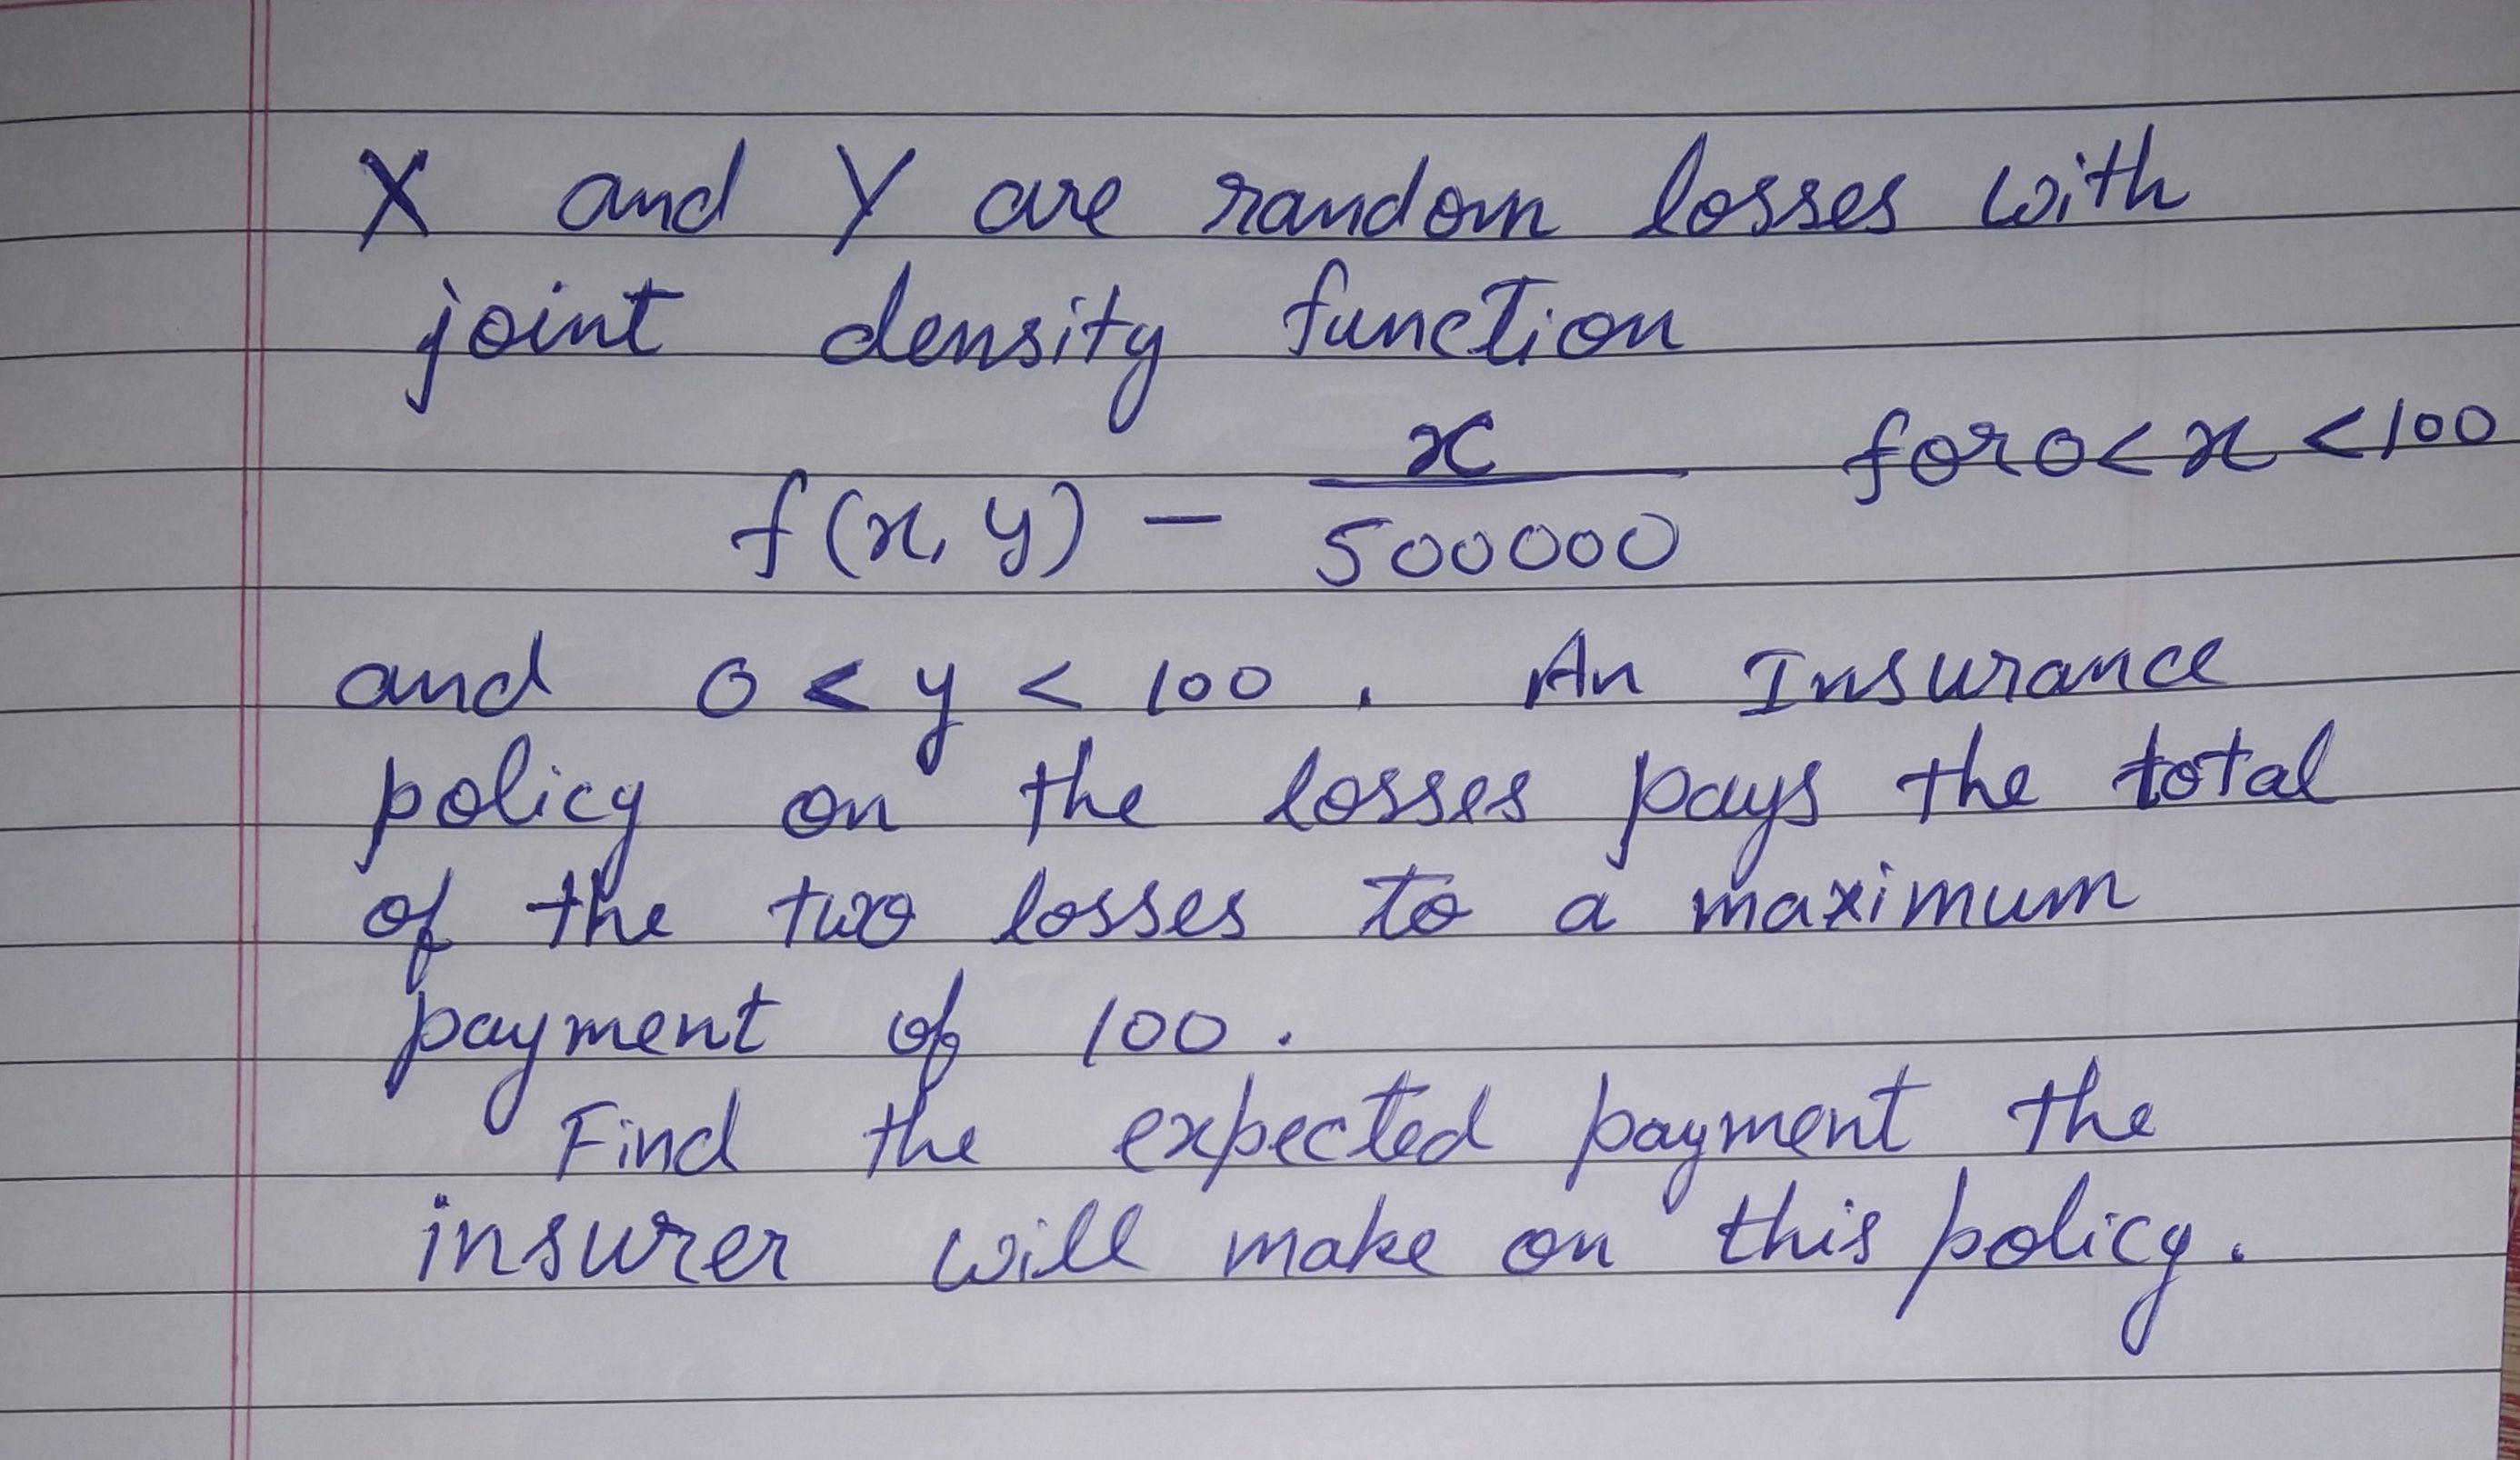 X and Y re random losses with
joint density
funcTion
2C
forocn<00
500000
An Insurance
losses pays the total
of the twX9 losses to a maximum
and oey< lo0,
100
policy
on the
payment of 100
the expectic fpagment the
insurer will make on this policy.
